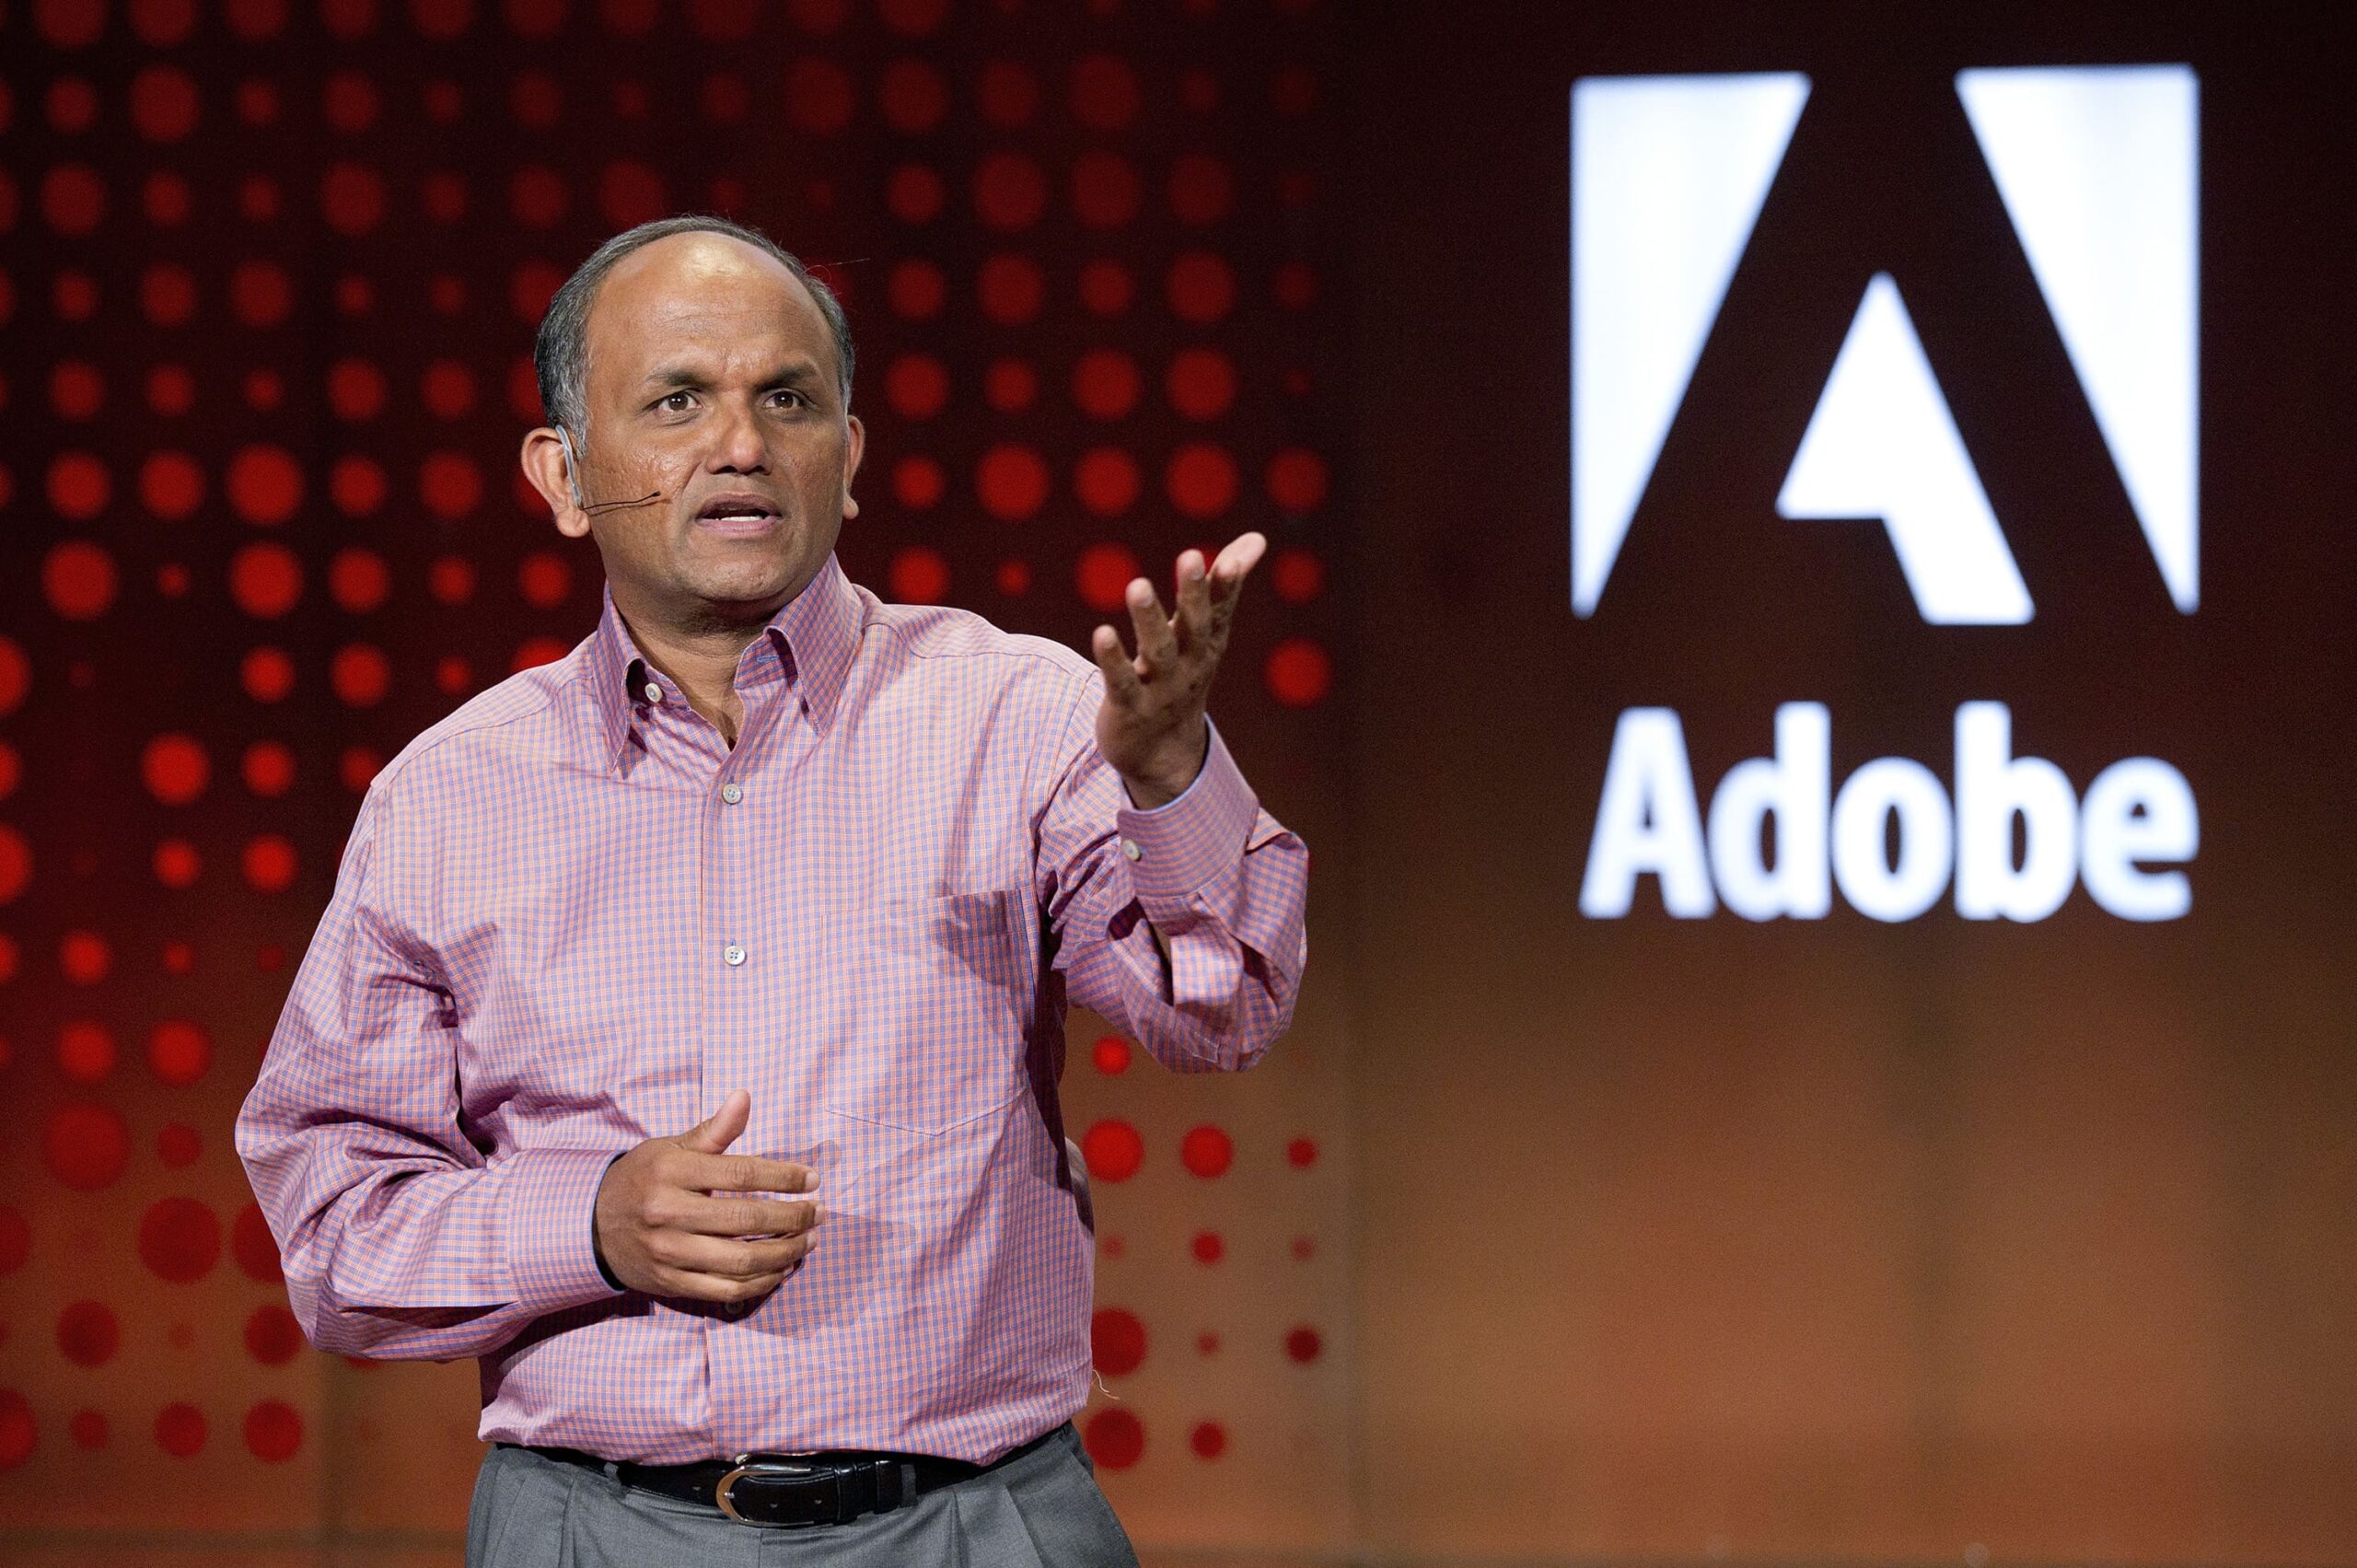 Adobe CEO blames timing for low guidance after shares tank